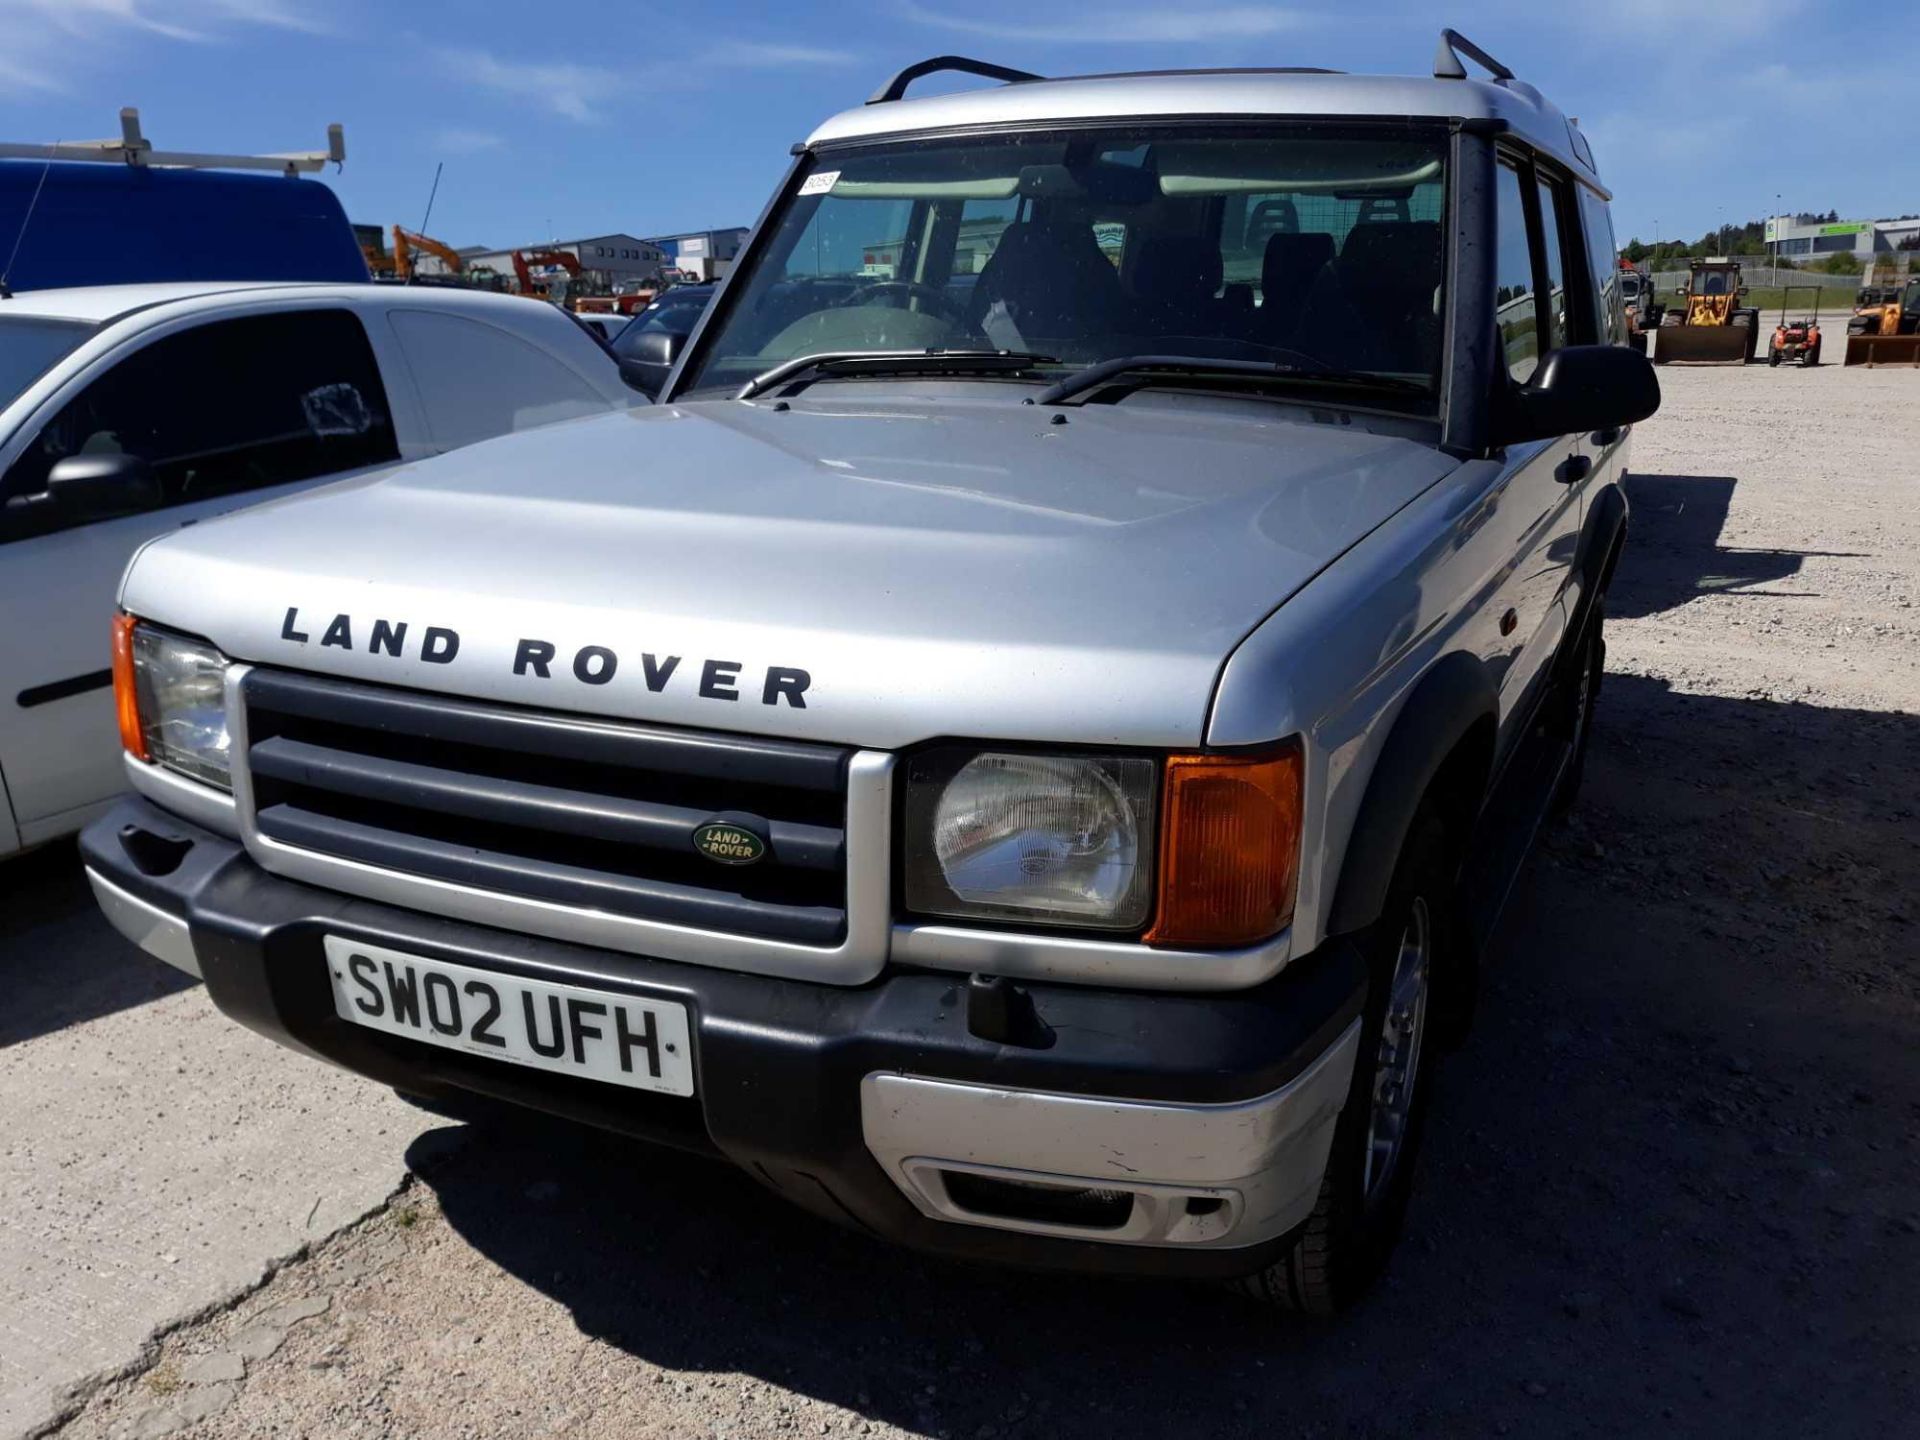 Land Rover Discovery Tdi Gs - 2495cc Estate - Image 2 of 3